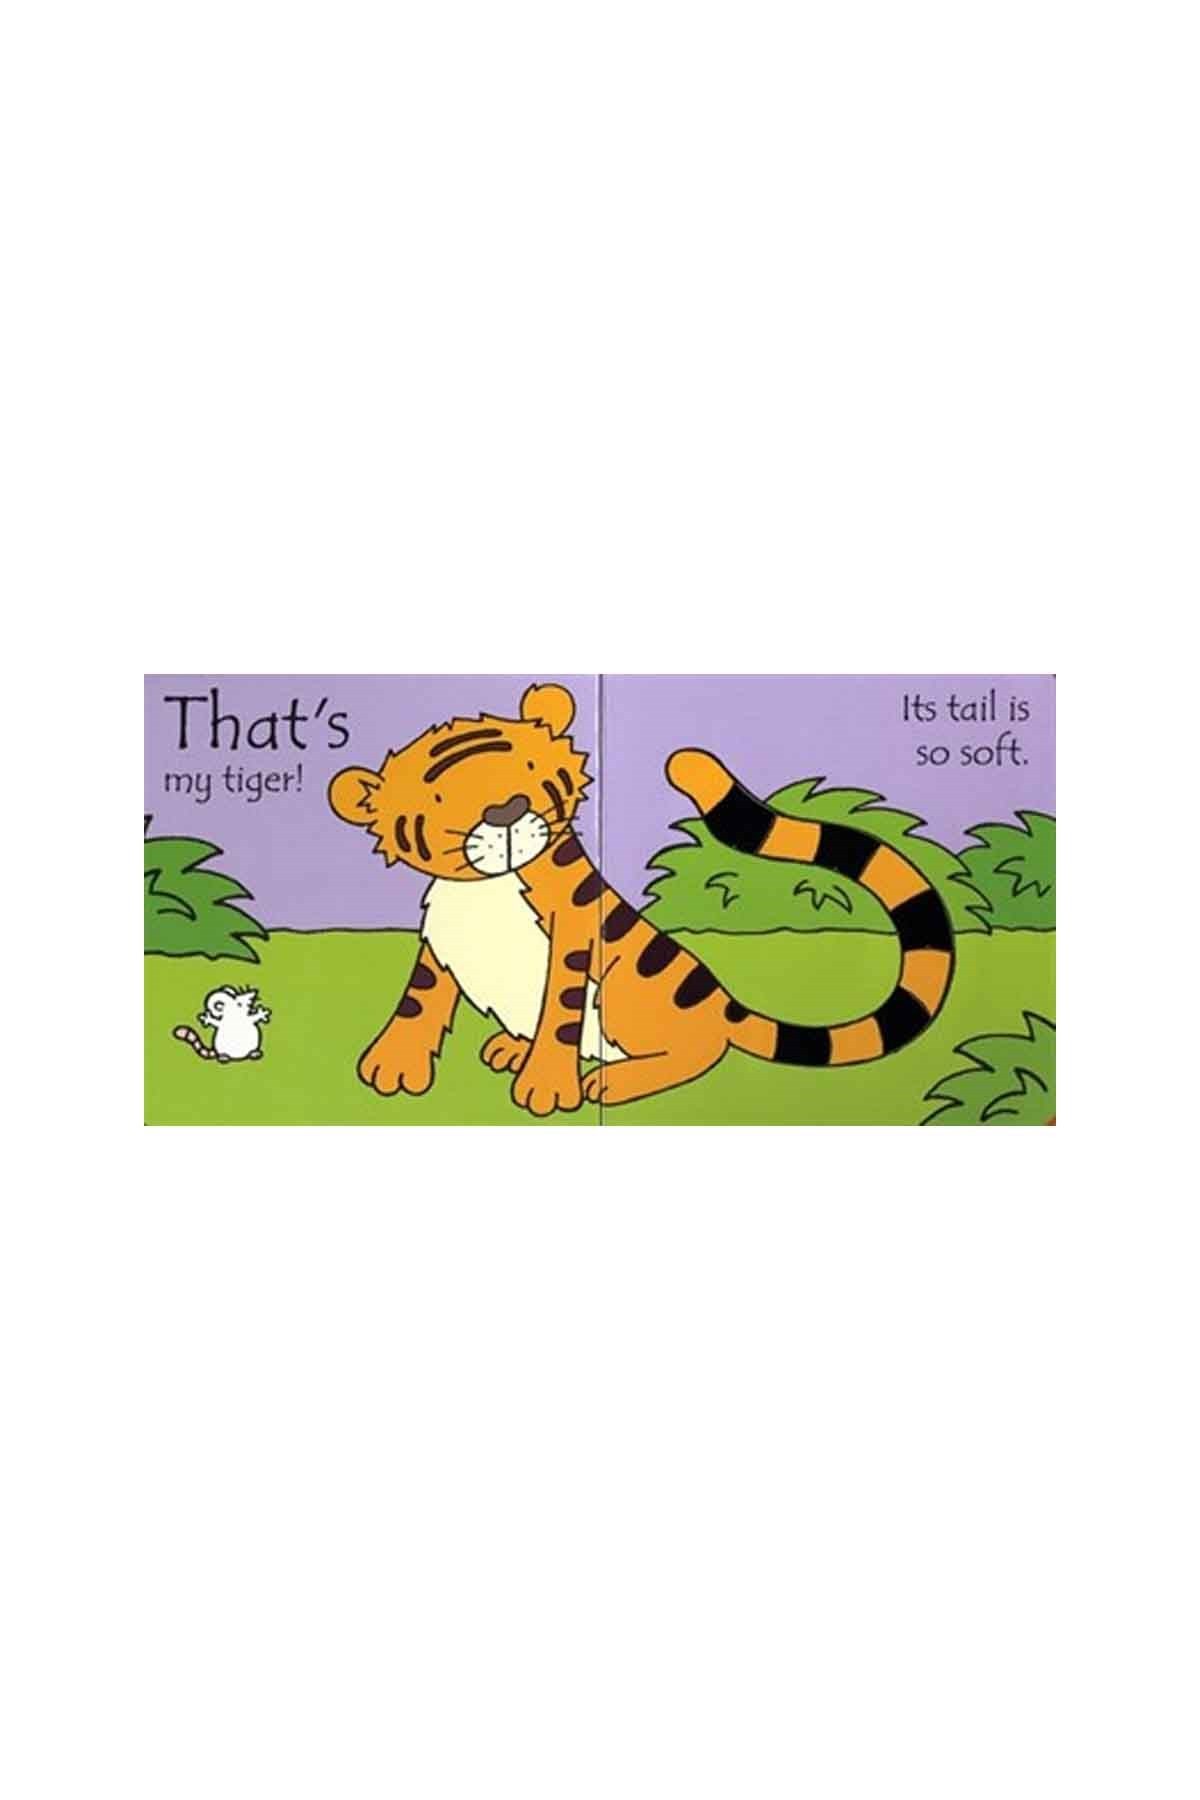 The Usborne That's Not My Tiger…